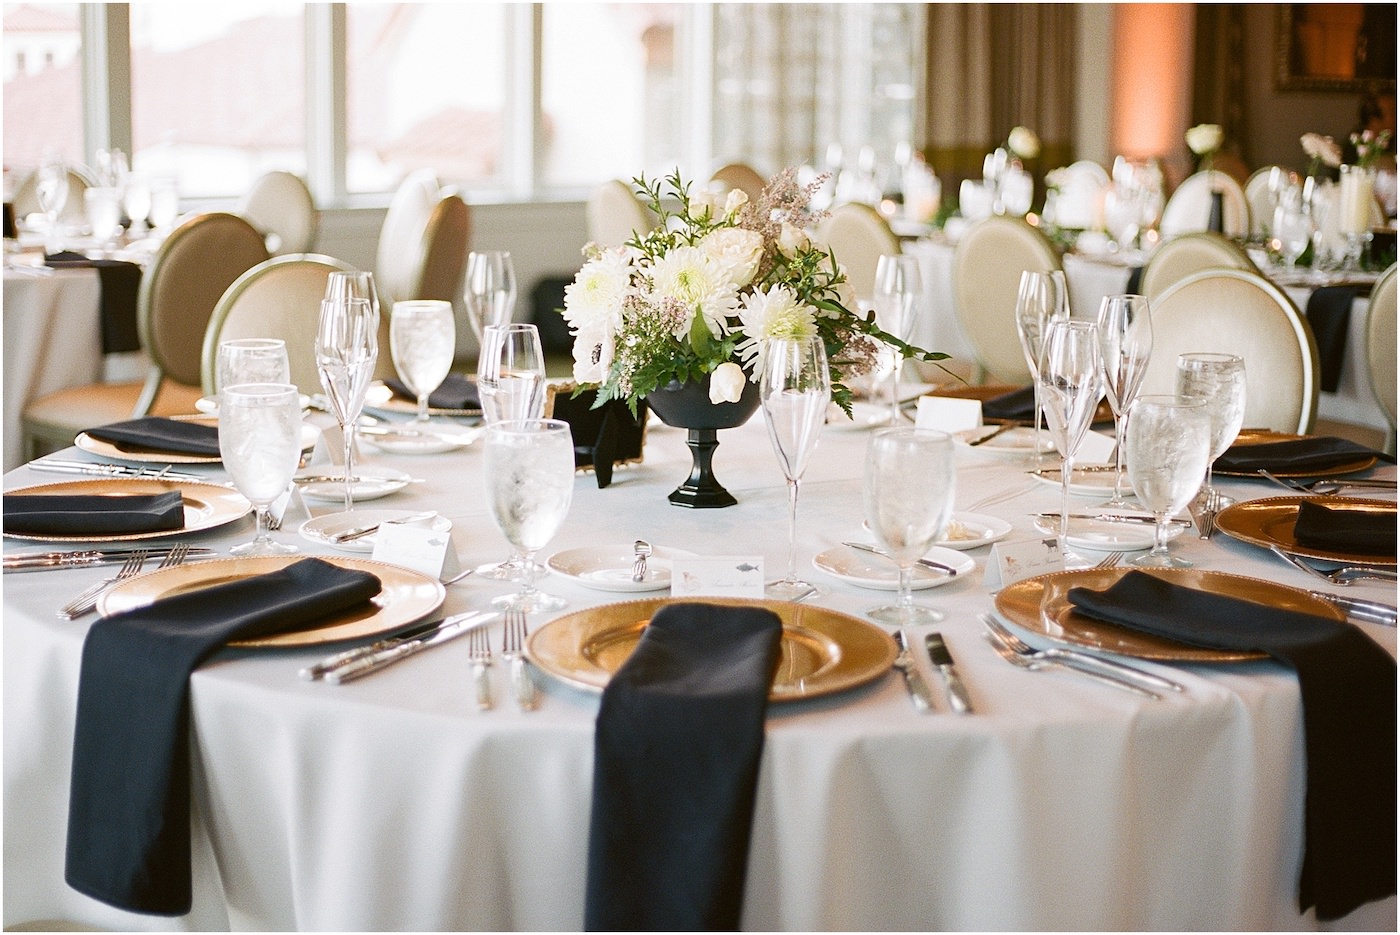 St. Pete Wedding Venue The Birchwood | Indoor Ballroom Wedding Reception with White Table Linens and Black Napkins on Gold Charger Plates and White Floral Centerpieces with Greenery